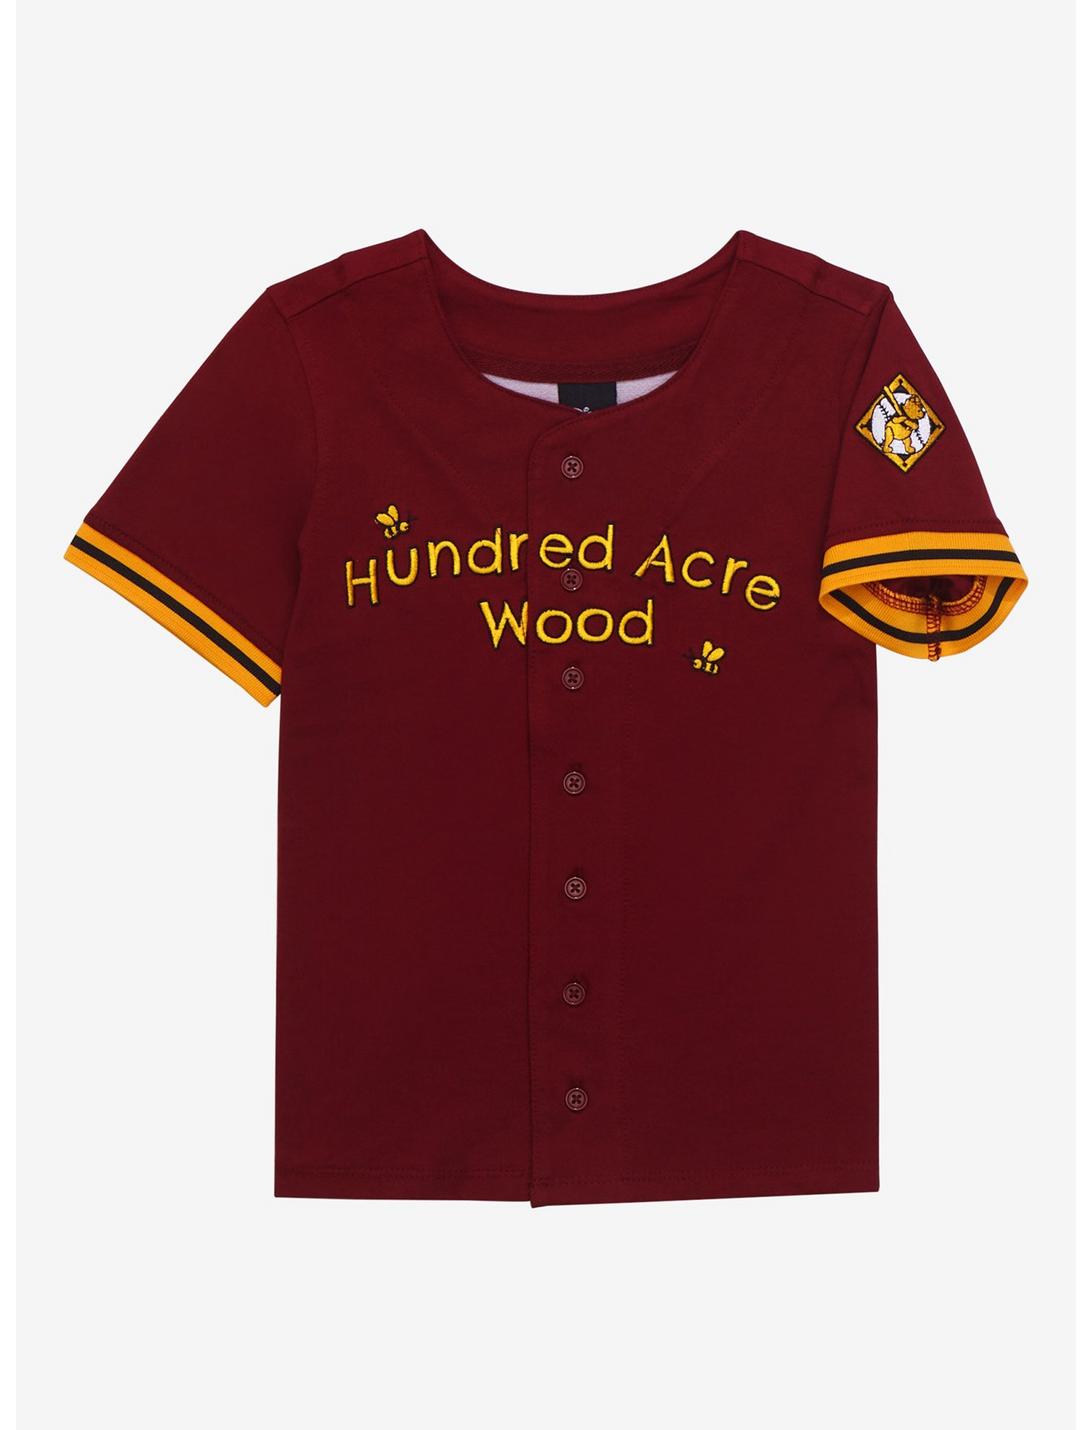 Disney Winnie the Pooh Hundred Acre Woods Toddler Baseball Jersey - BoxLunch Exclusive, BURGUNDY GOLD, hi-res